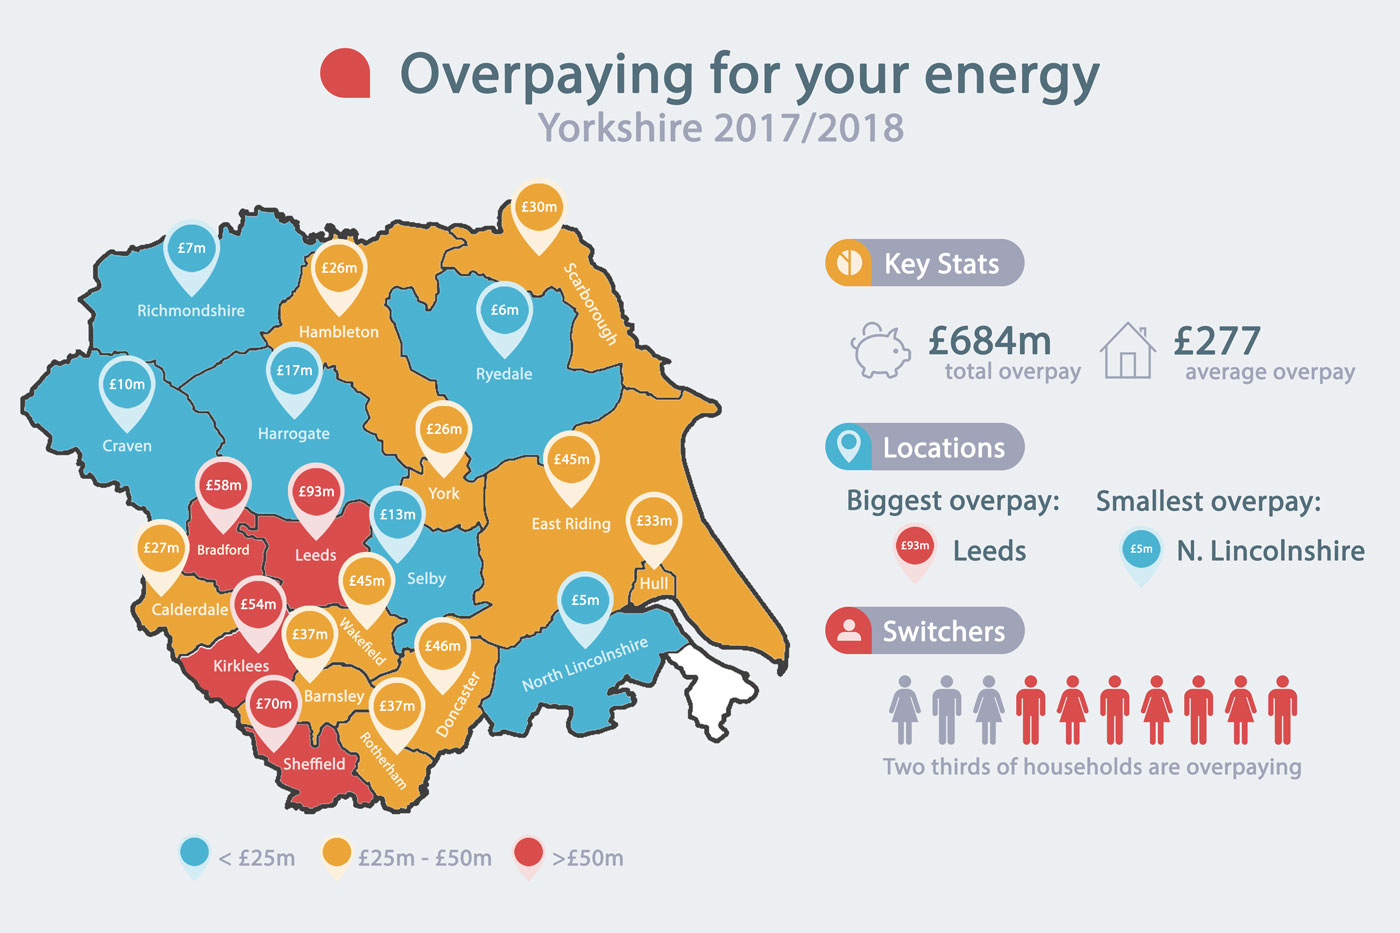 Yorkshire overpaying £684m on their energy bill!